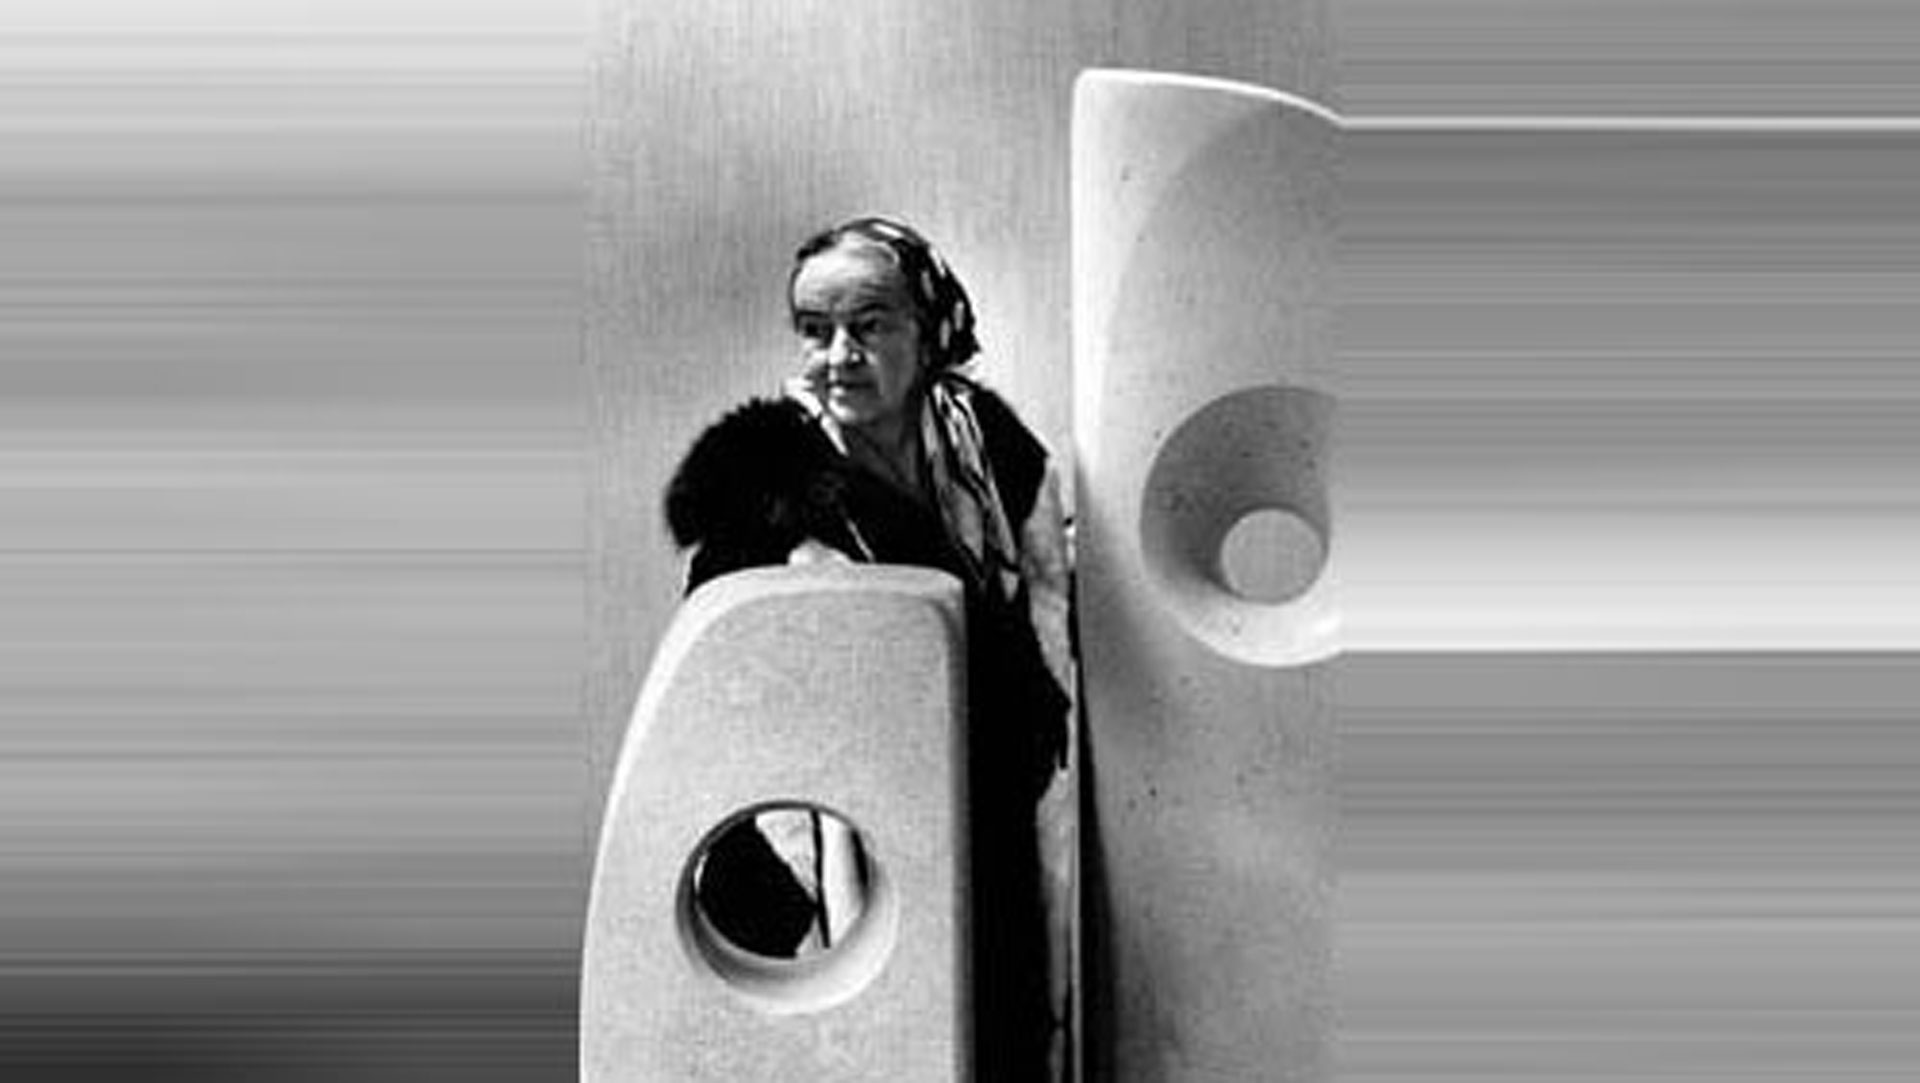 Barbara Hepworth DBE (10 January 1903 – 20 May 1975) - an English, West Yorkshire-born artist and sculptor, who has become the new patron of a five-storey, 7,500 square metre University of Huddersfield new campus building.